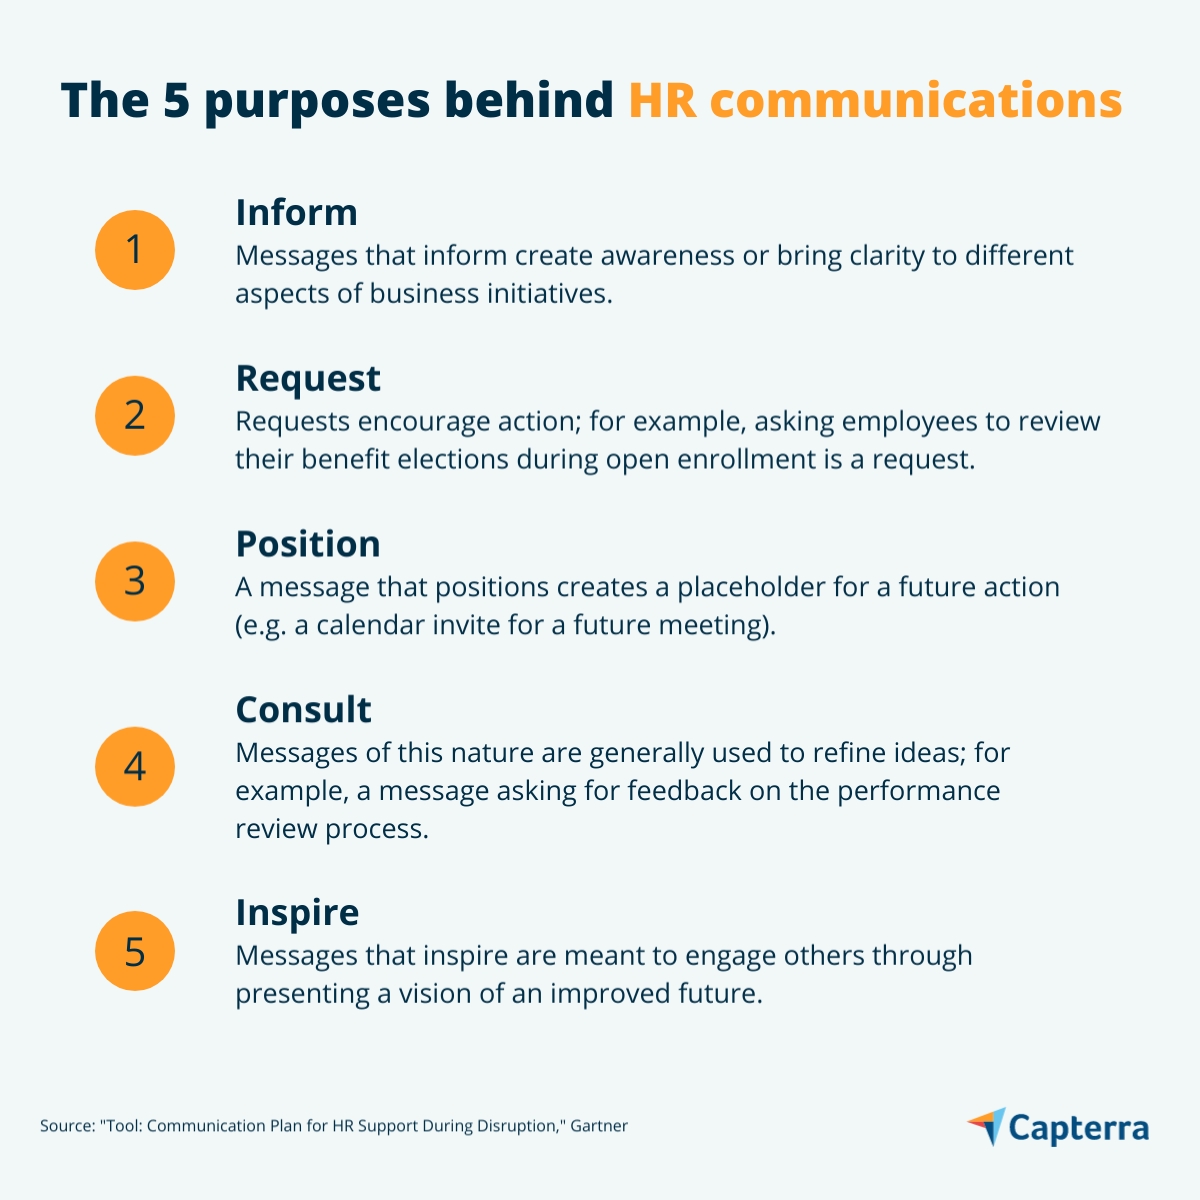 5 purposes of hr communication graphic for the blog article "How To Build an HR Communication Plan"